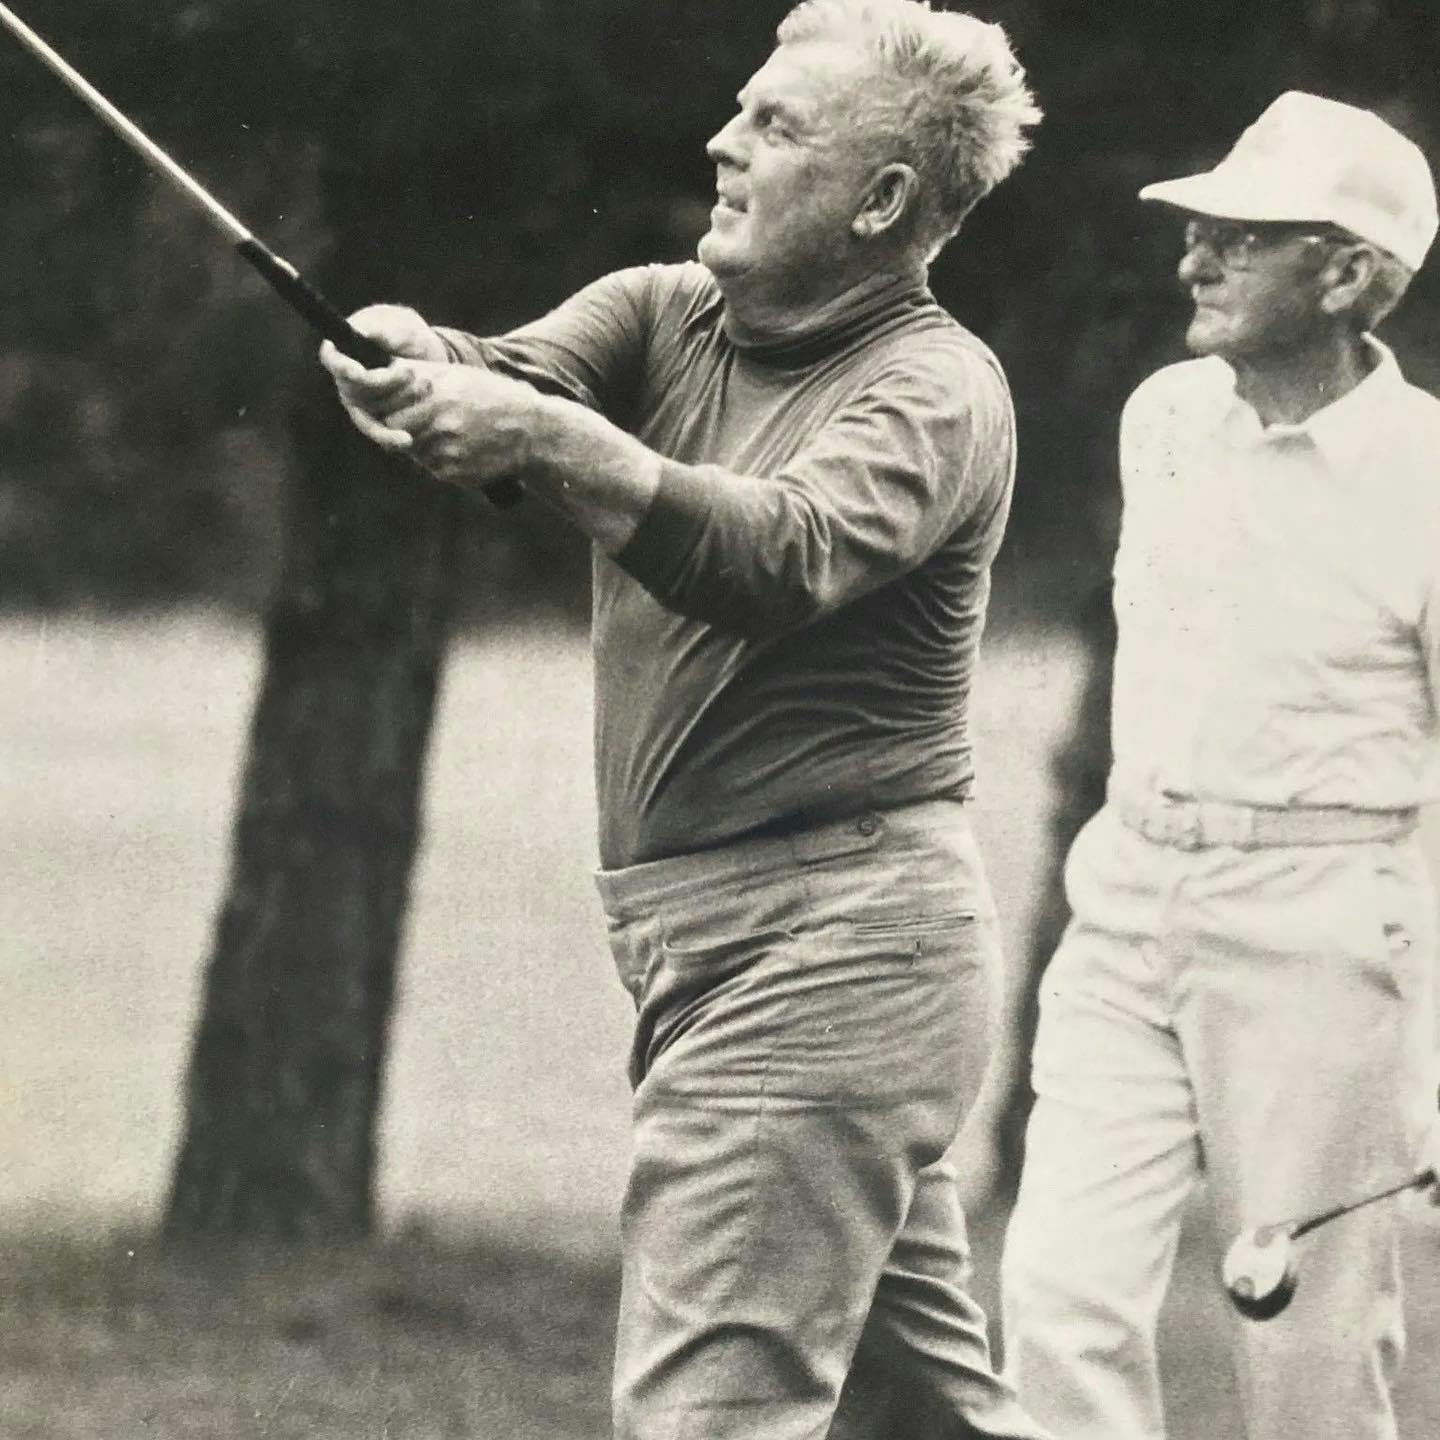 Moe Norman and George Clifton playing the 1982 Ontario Jr. Pro / Sr. Pro. We hosted the event from 1982-1985. 

The second picture is Greg and George Louth playing in the event!